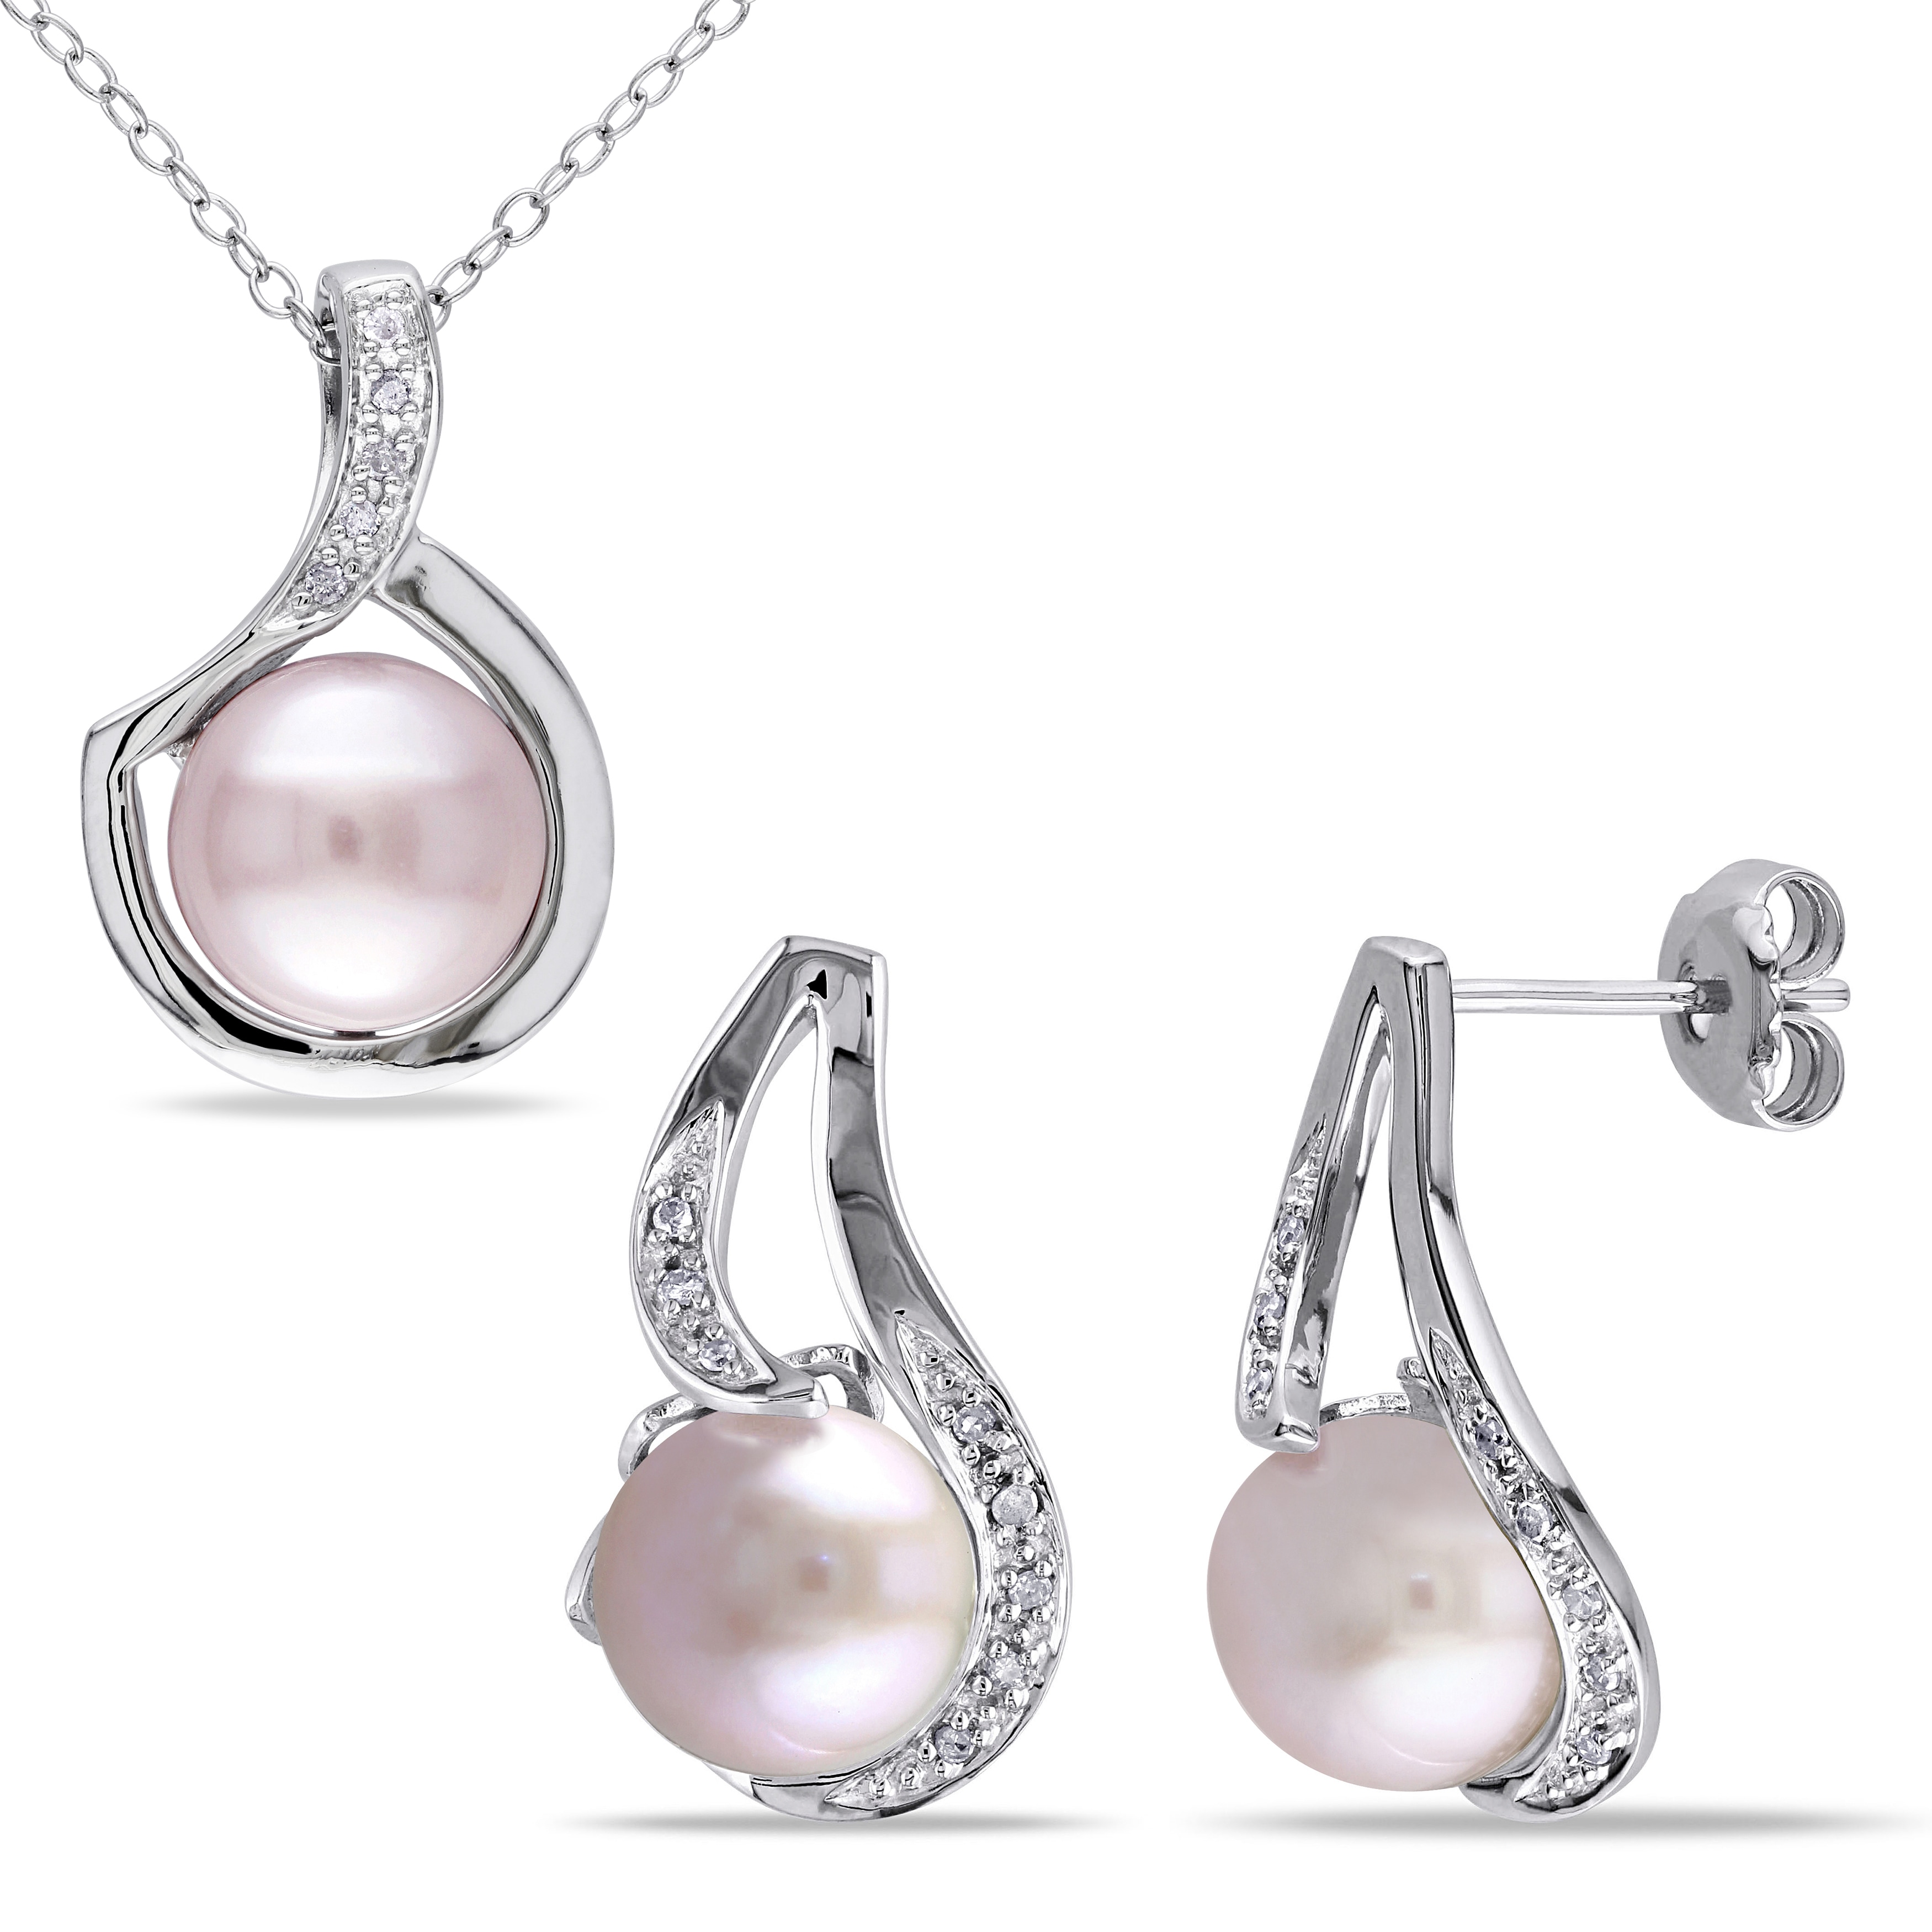 silver and pearl necklace and earrings